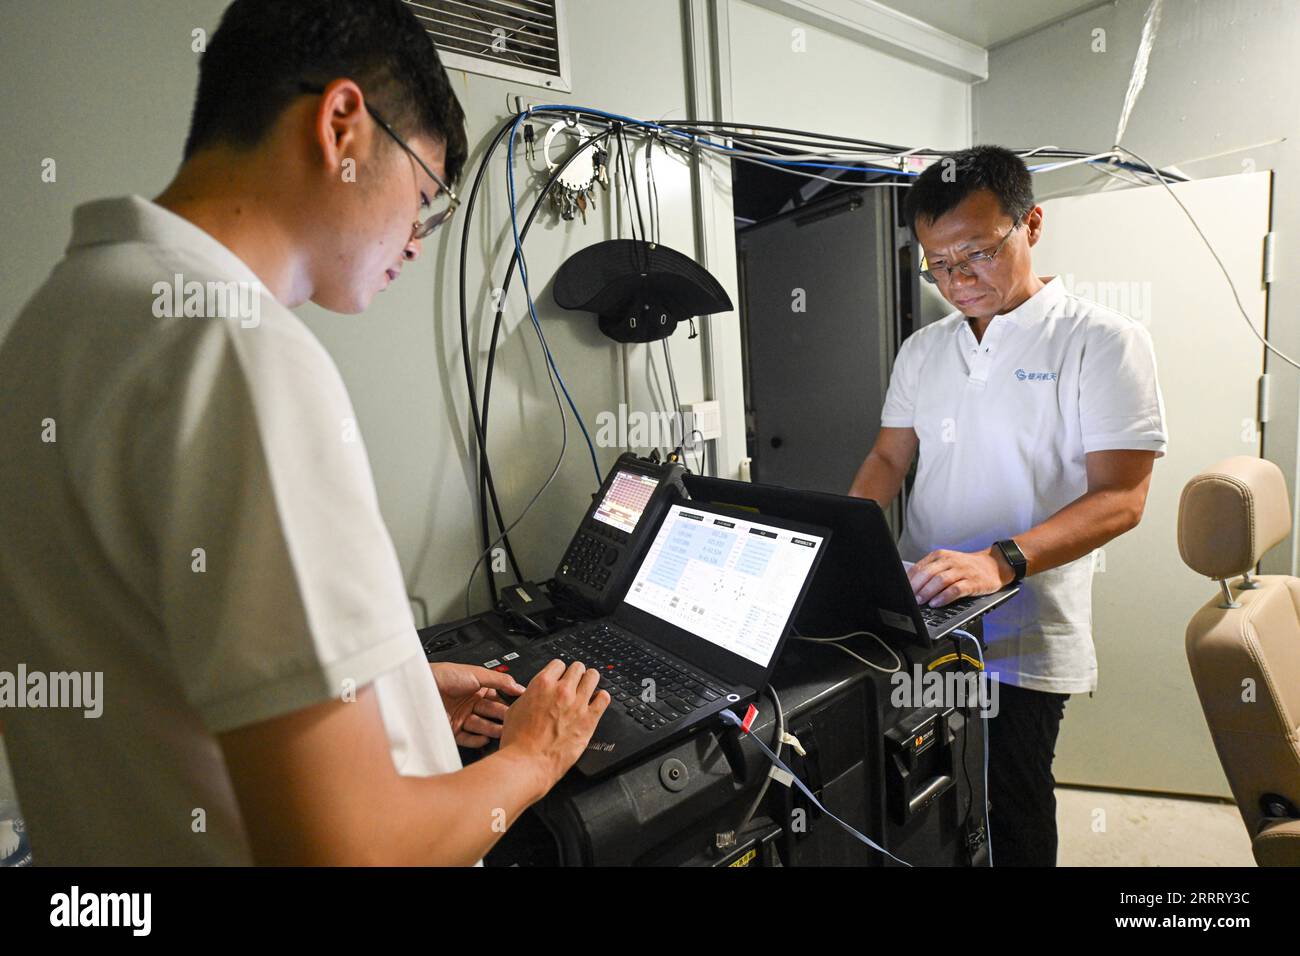 230617 -- HAIKOU, June 17, 2023 -- Staff members test devices at a low-Earth orbit gateway station in Lingshui Li Autonomous County, south China s Hainan Province, June 13, 2023. Researchers from the GalaxySpace, a Beijing-based satellite maker, and several scientific research institutions, conducted an open-sea testing of the country s first low-Earth orbit broadband communication test constellation in the South China Sea. The testing aims to verify the collaborative communication coverage ability of high-Earth orbit and low-Earth orbit satellites, and unmanned aerial vehicles. In March 2022, Stock Photo